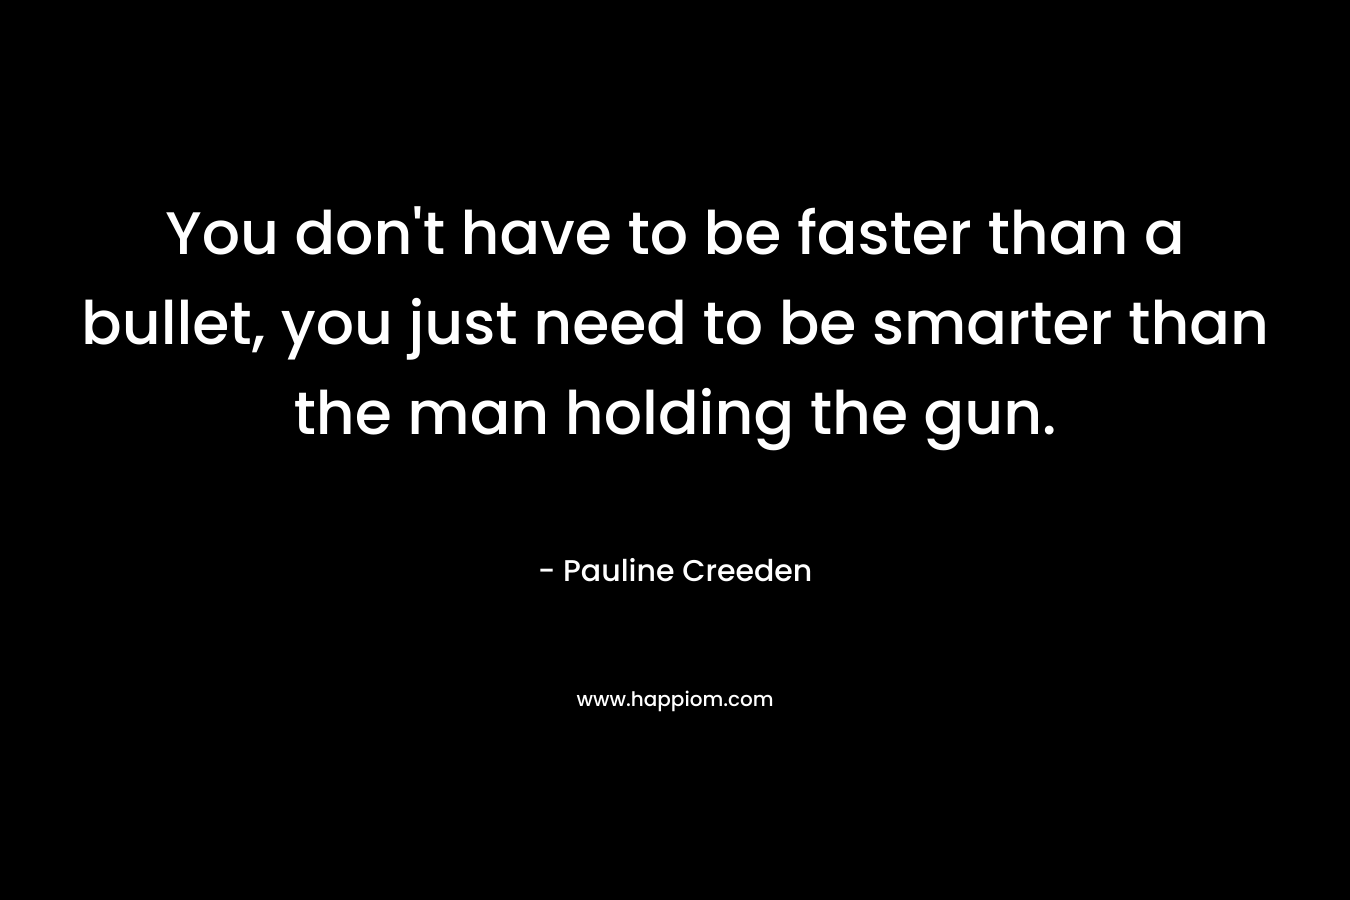 You don't have to be faster than a bullet, you just need to be smarter than the man holding the gun.